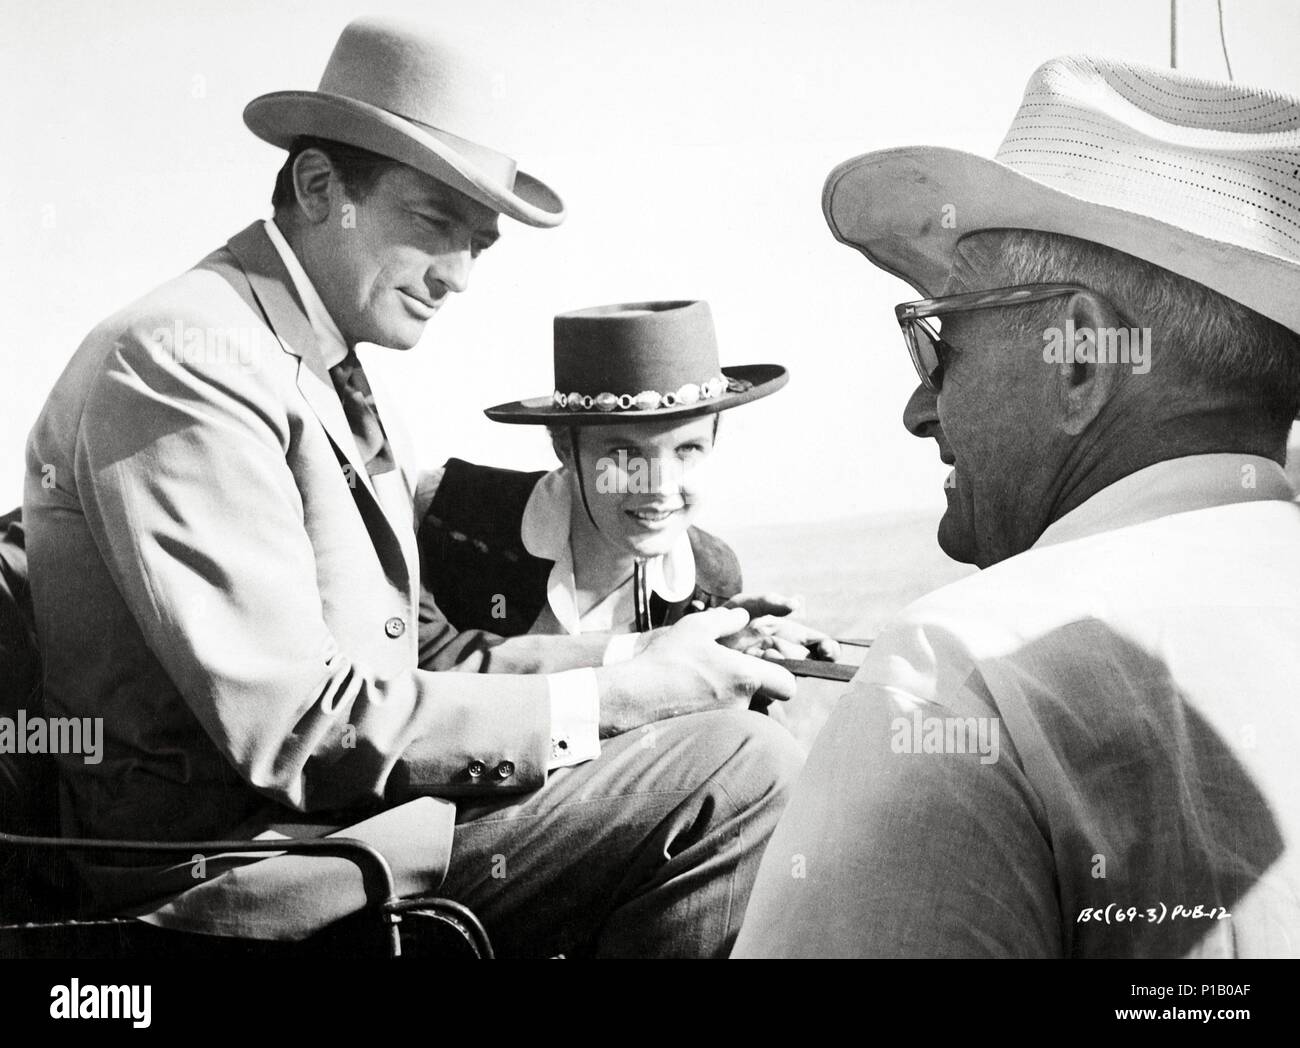 Original Film Title: THE BIG COUNTRY.  English Title: THE BIG COUNTRY.  Film Director: WILLIAM WYLER.  Year: 1958.  Stars: WILLIAM WYLER; GREGORY PECK; CARROLL BAKER. Credit: UNITED ARTISTS / Album Stock Photo